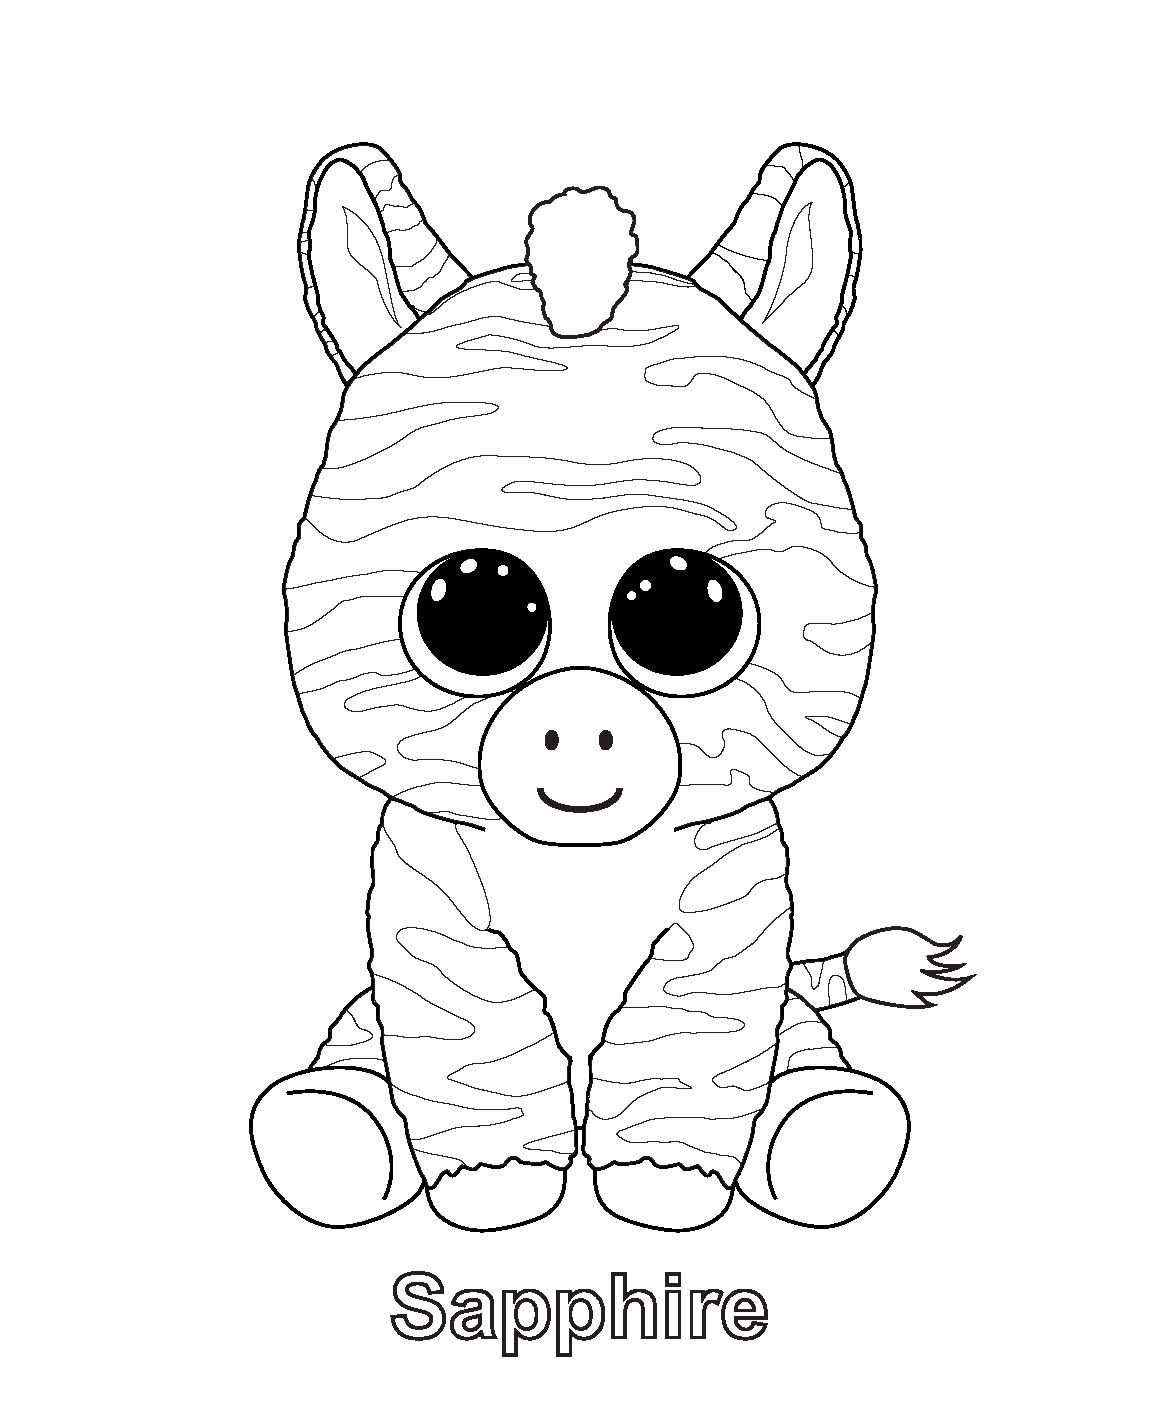 Sapphire - Beanie Boo Coloring Pages